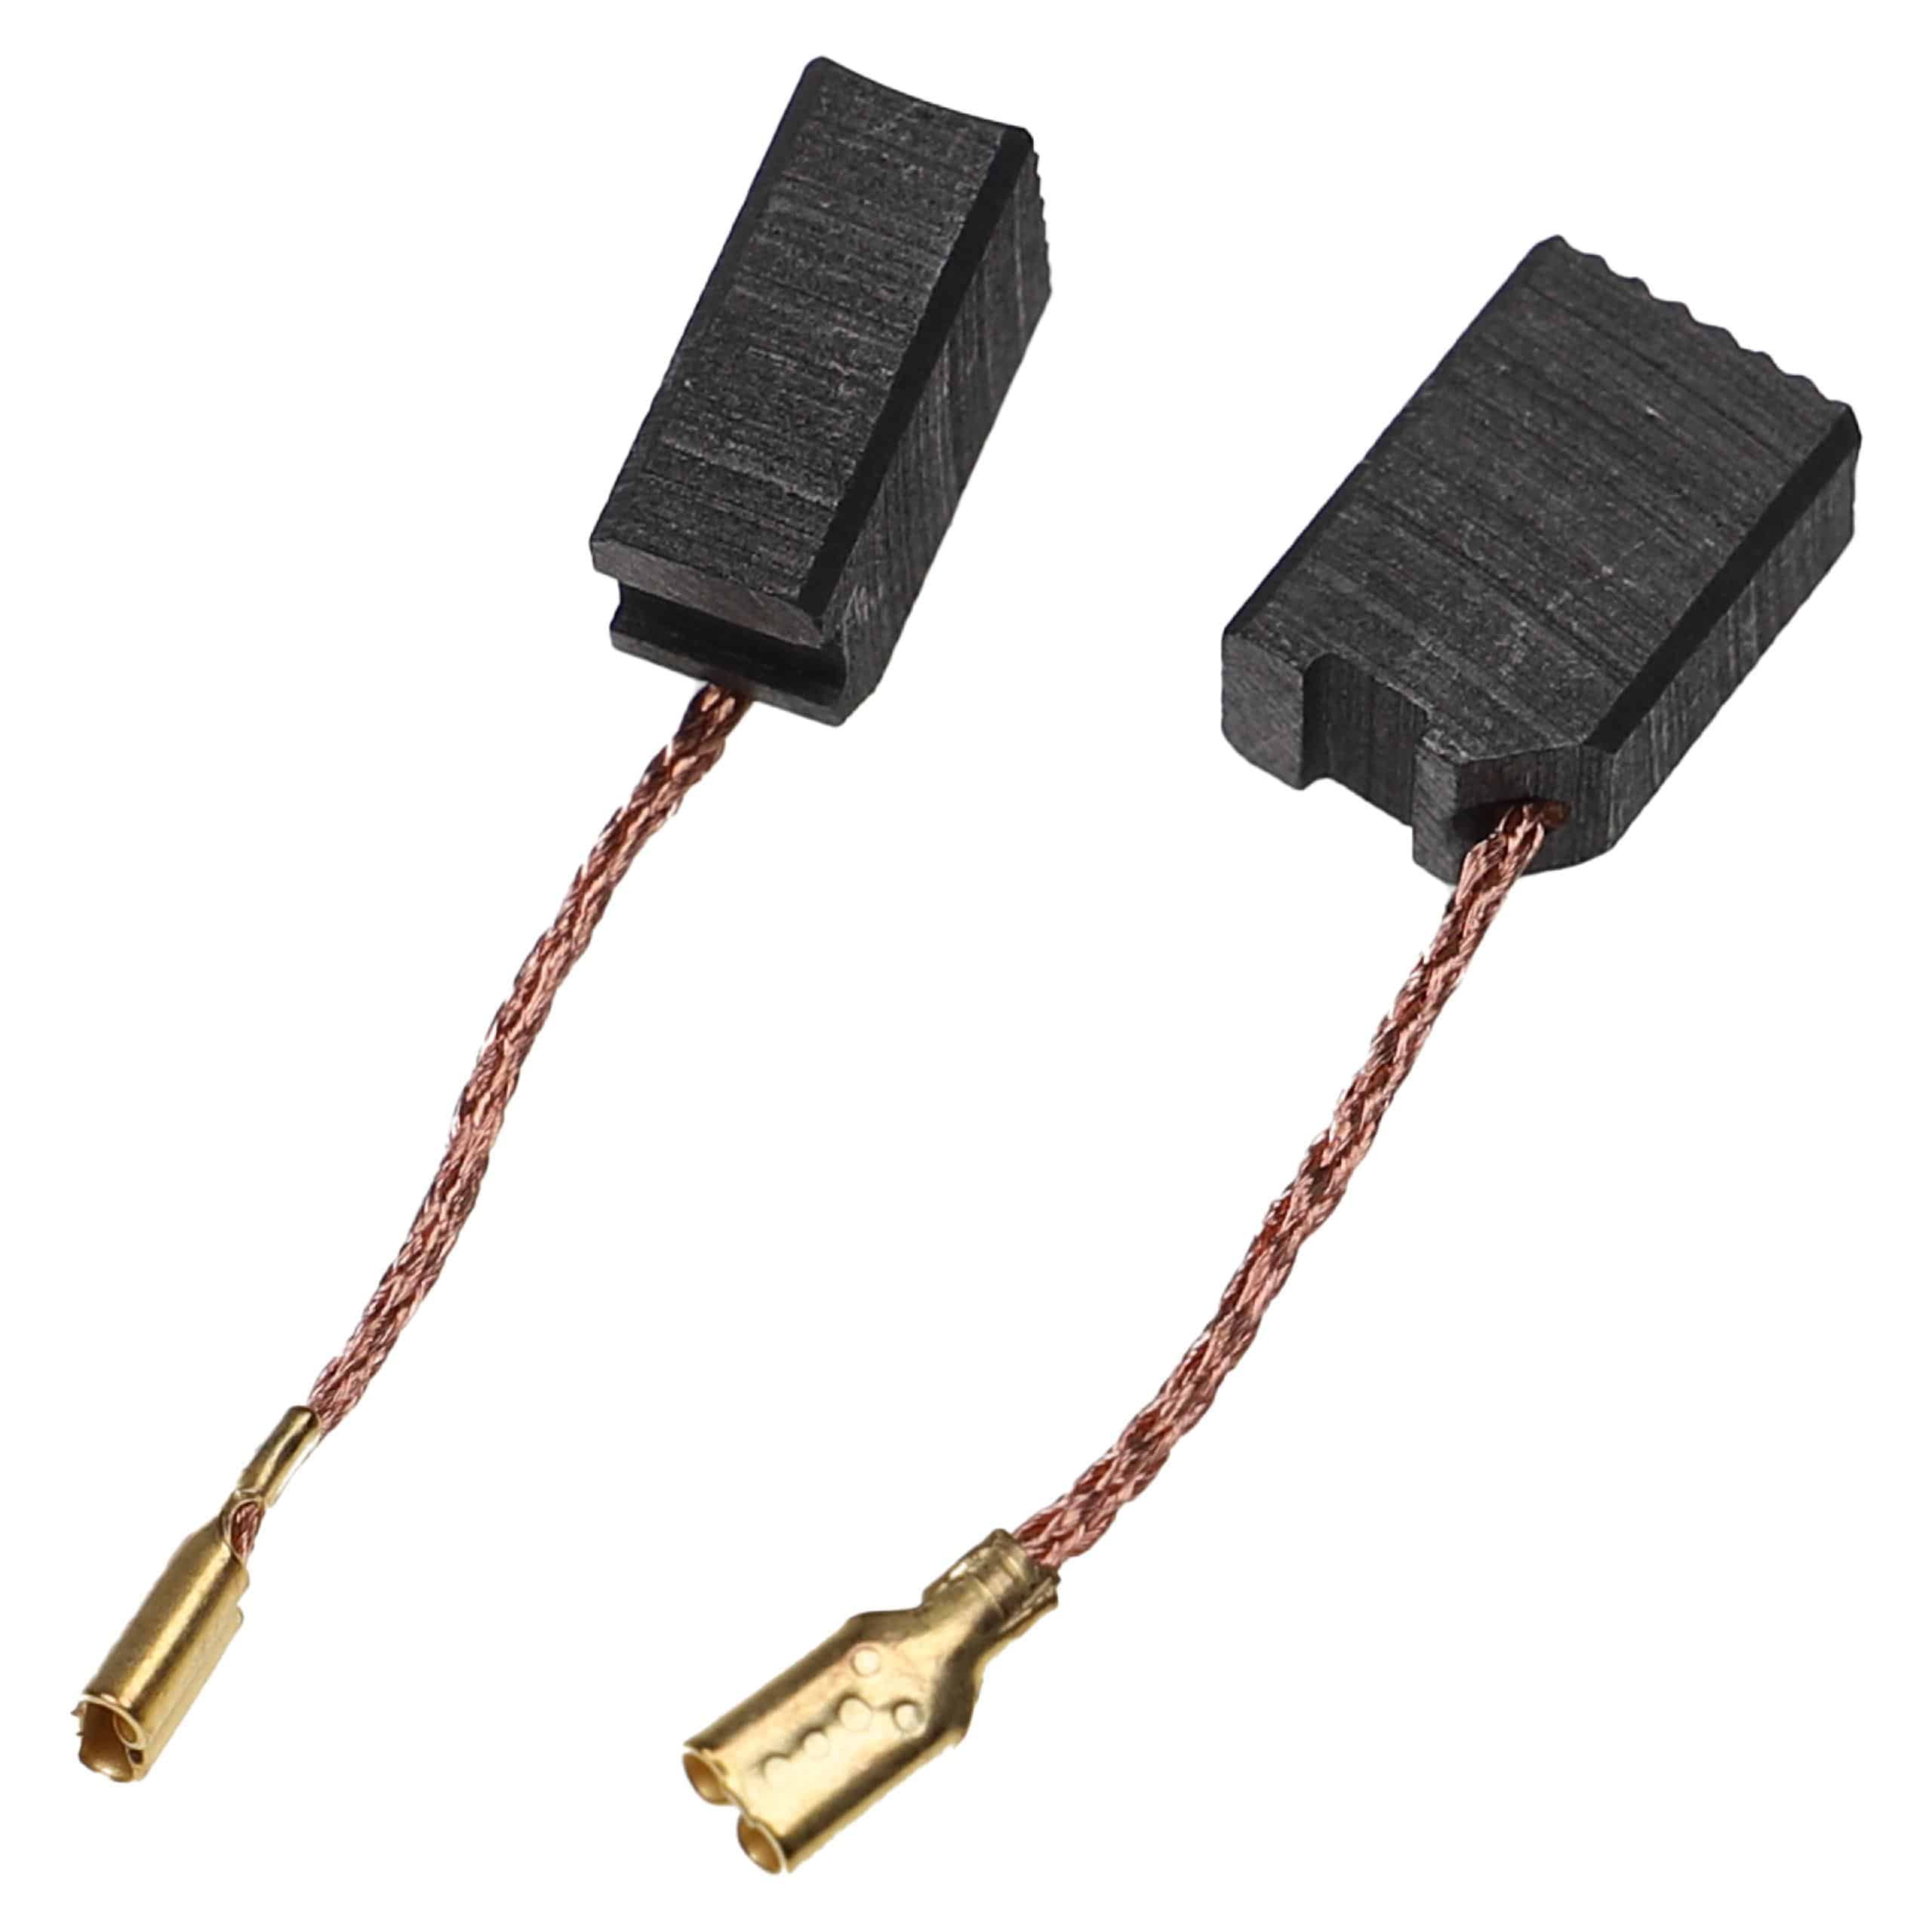 2x Carbon Brush as Replacement for Berner 1003861-00 Electric Power Tools, 6.3 x 10 x 14mm